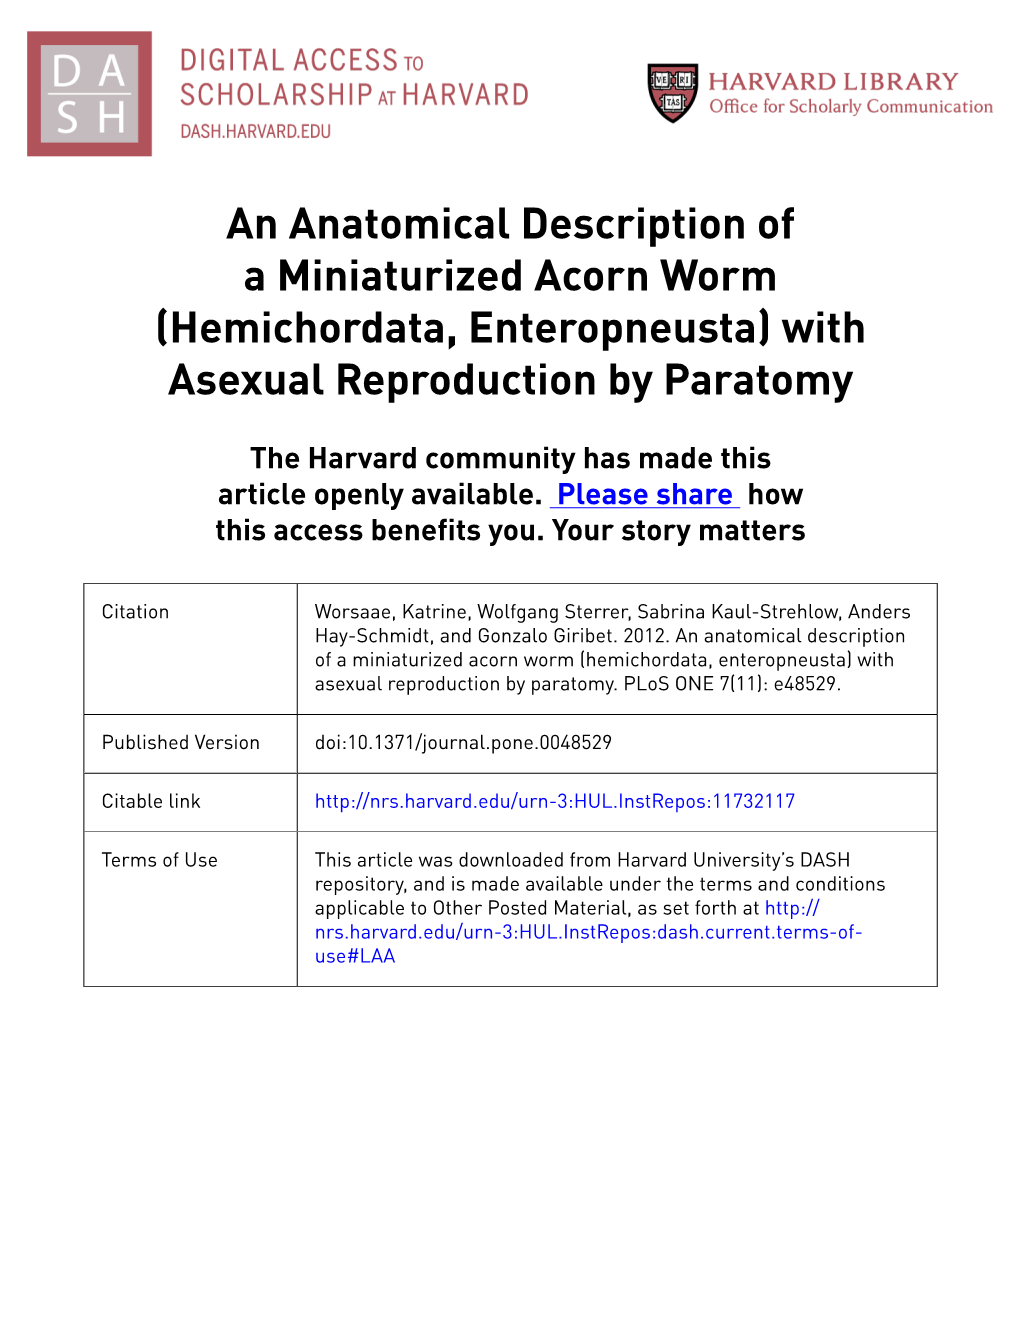 An Anatomical Description of a Miniaturized Acorn Worm (Hemichordata, Enteropneusta) with Asexual Reproduction by Paratomy